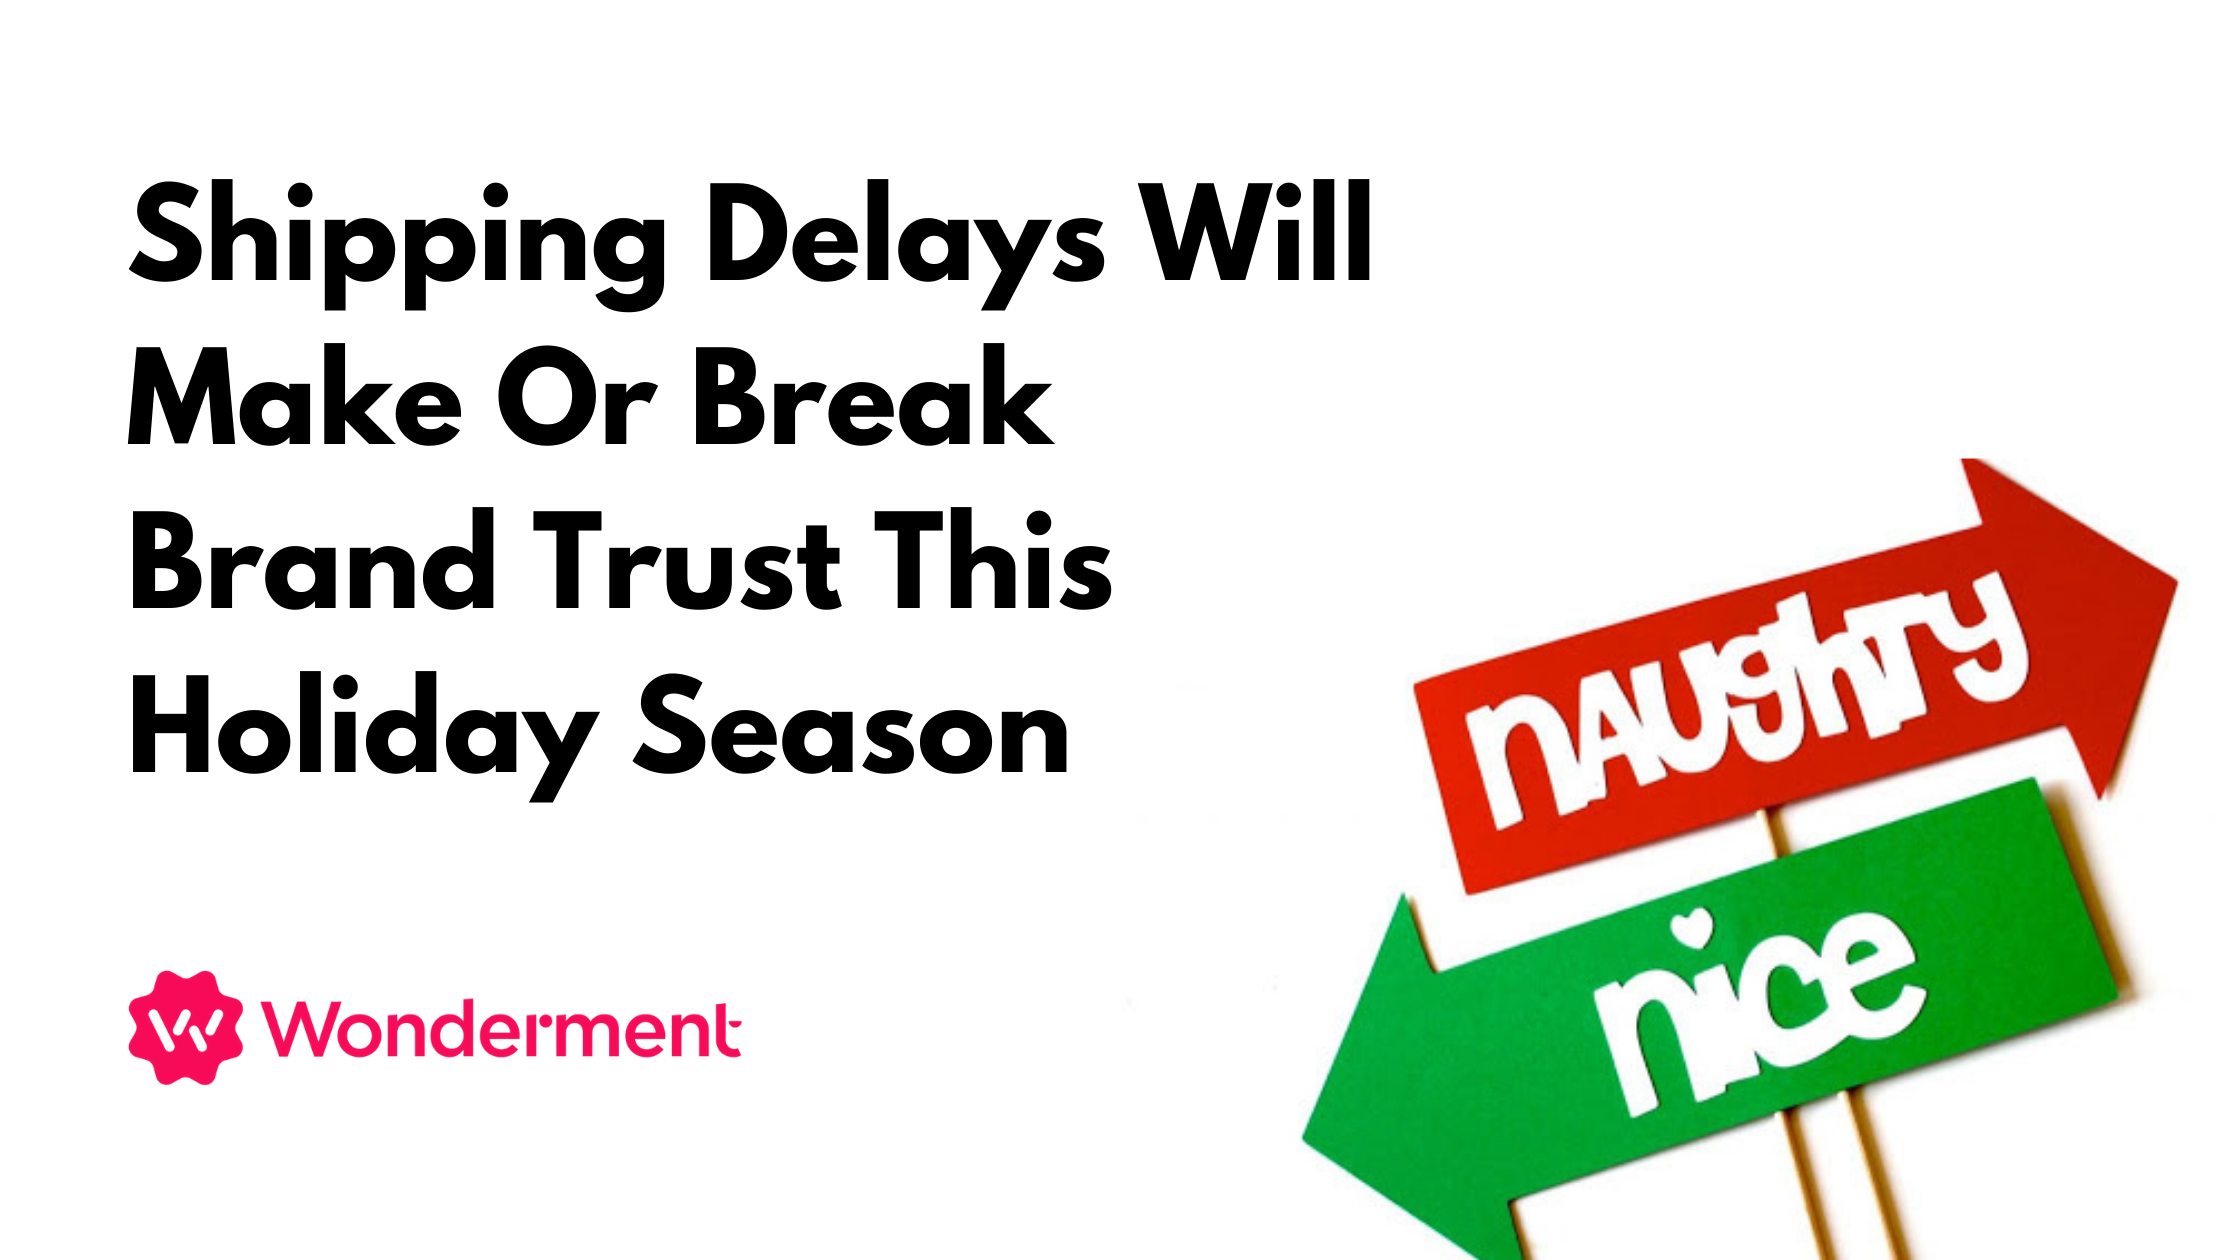 Shipping Delays Will Make or Break Brand Trust This Holiday Season